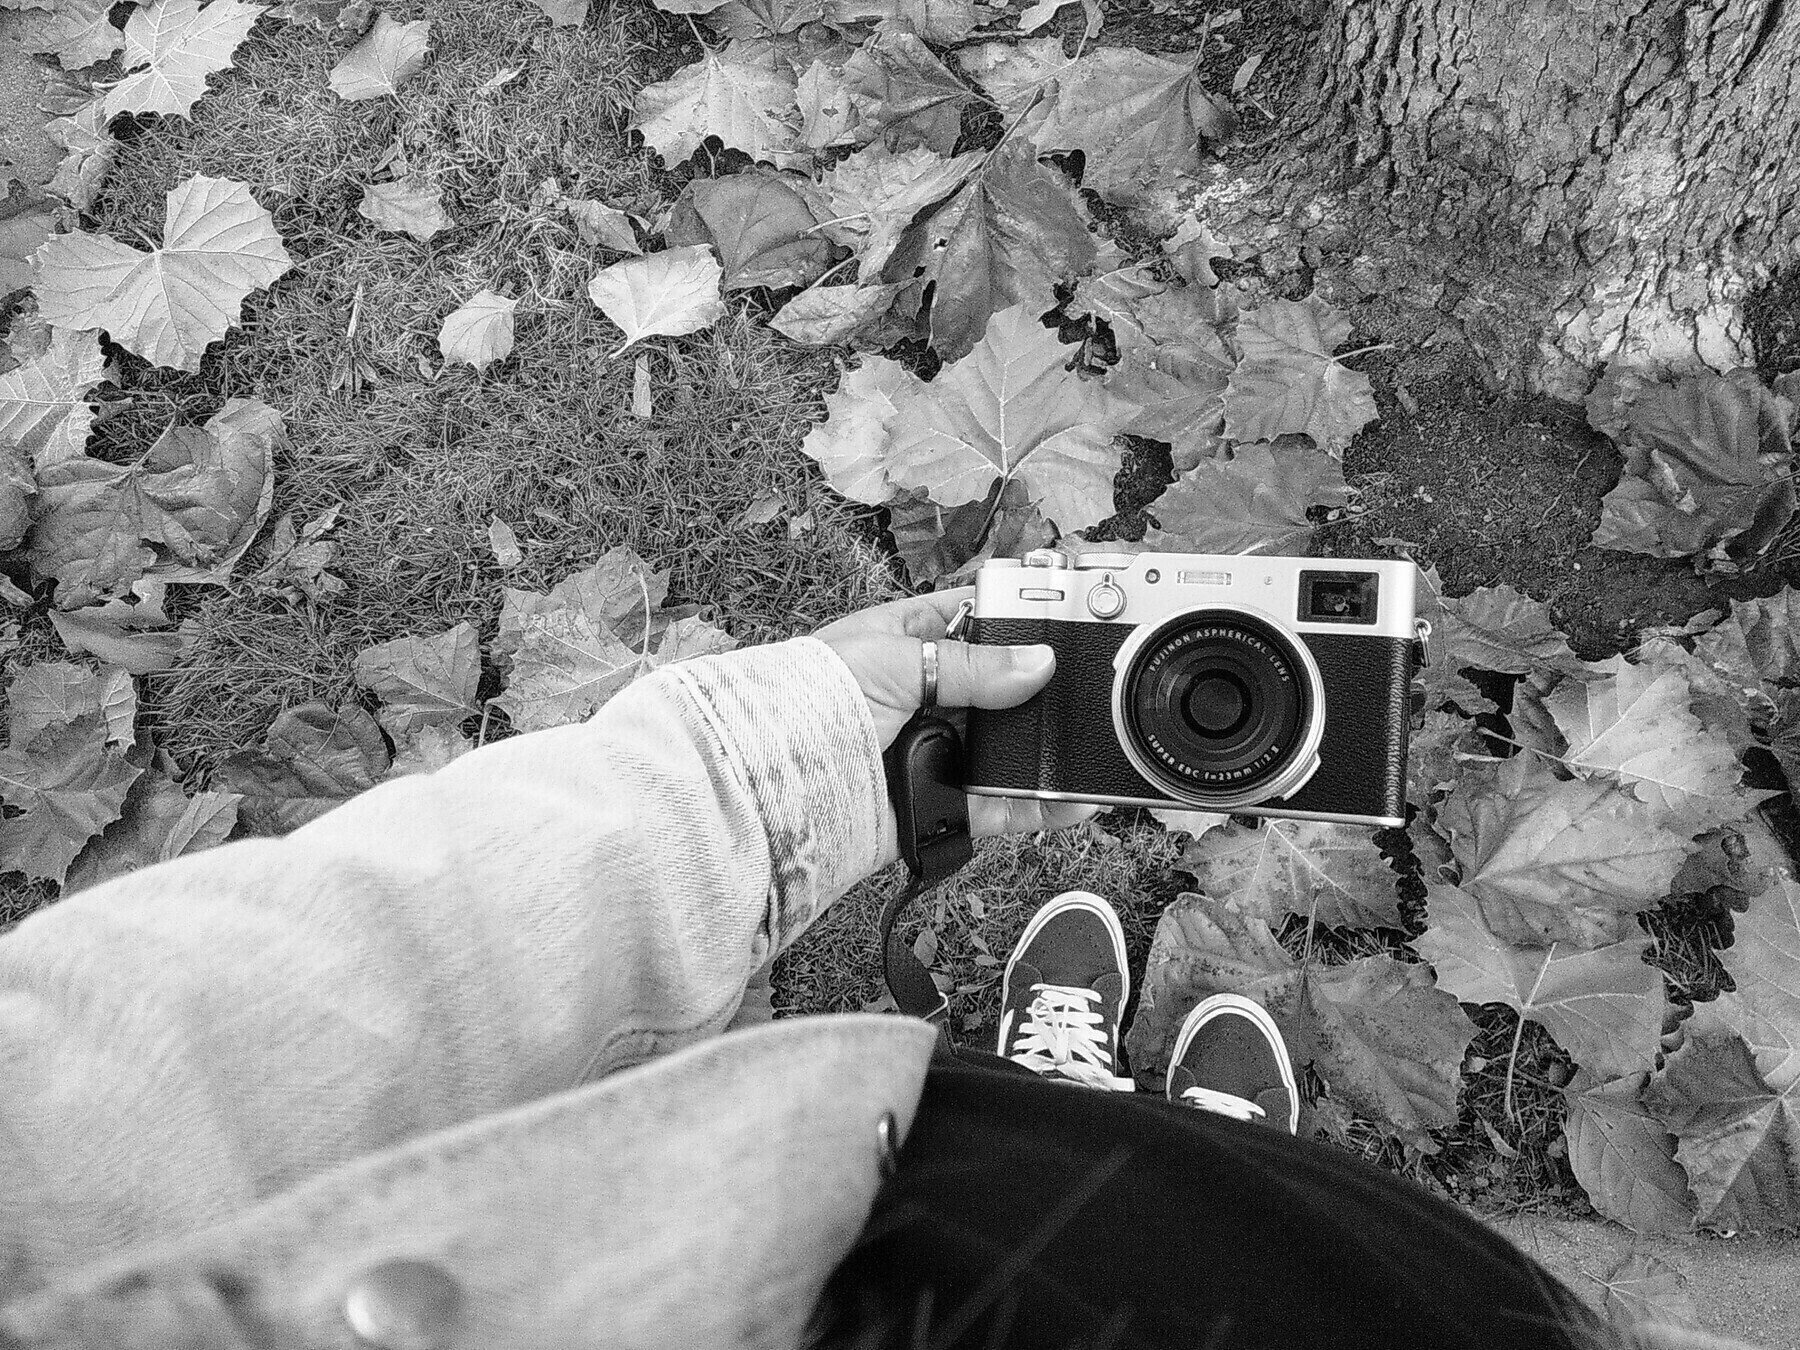 black and white photo. hand holding a camera shot from above, with shoes and leaves visible on the ground